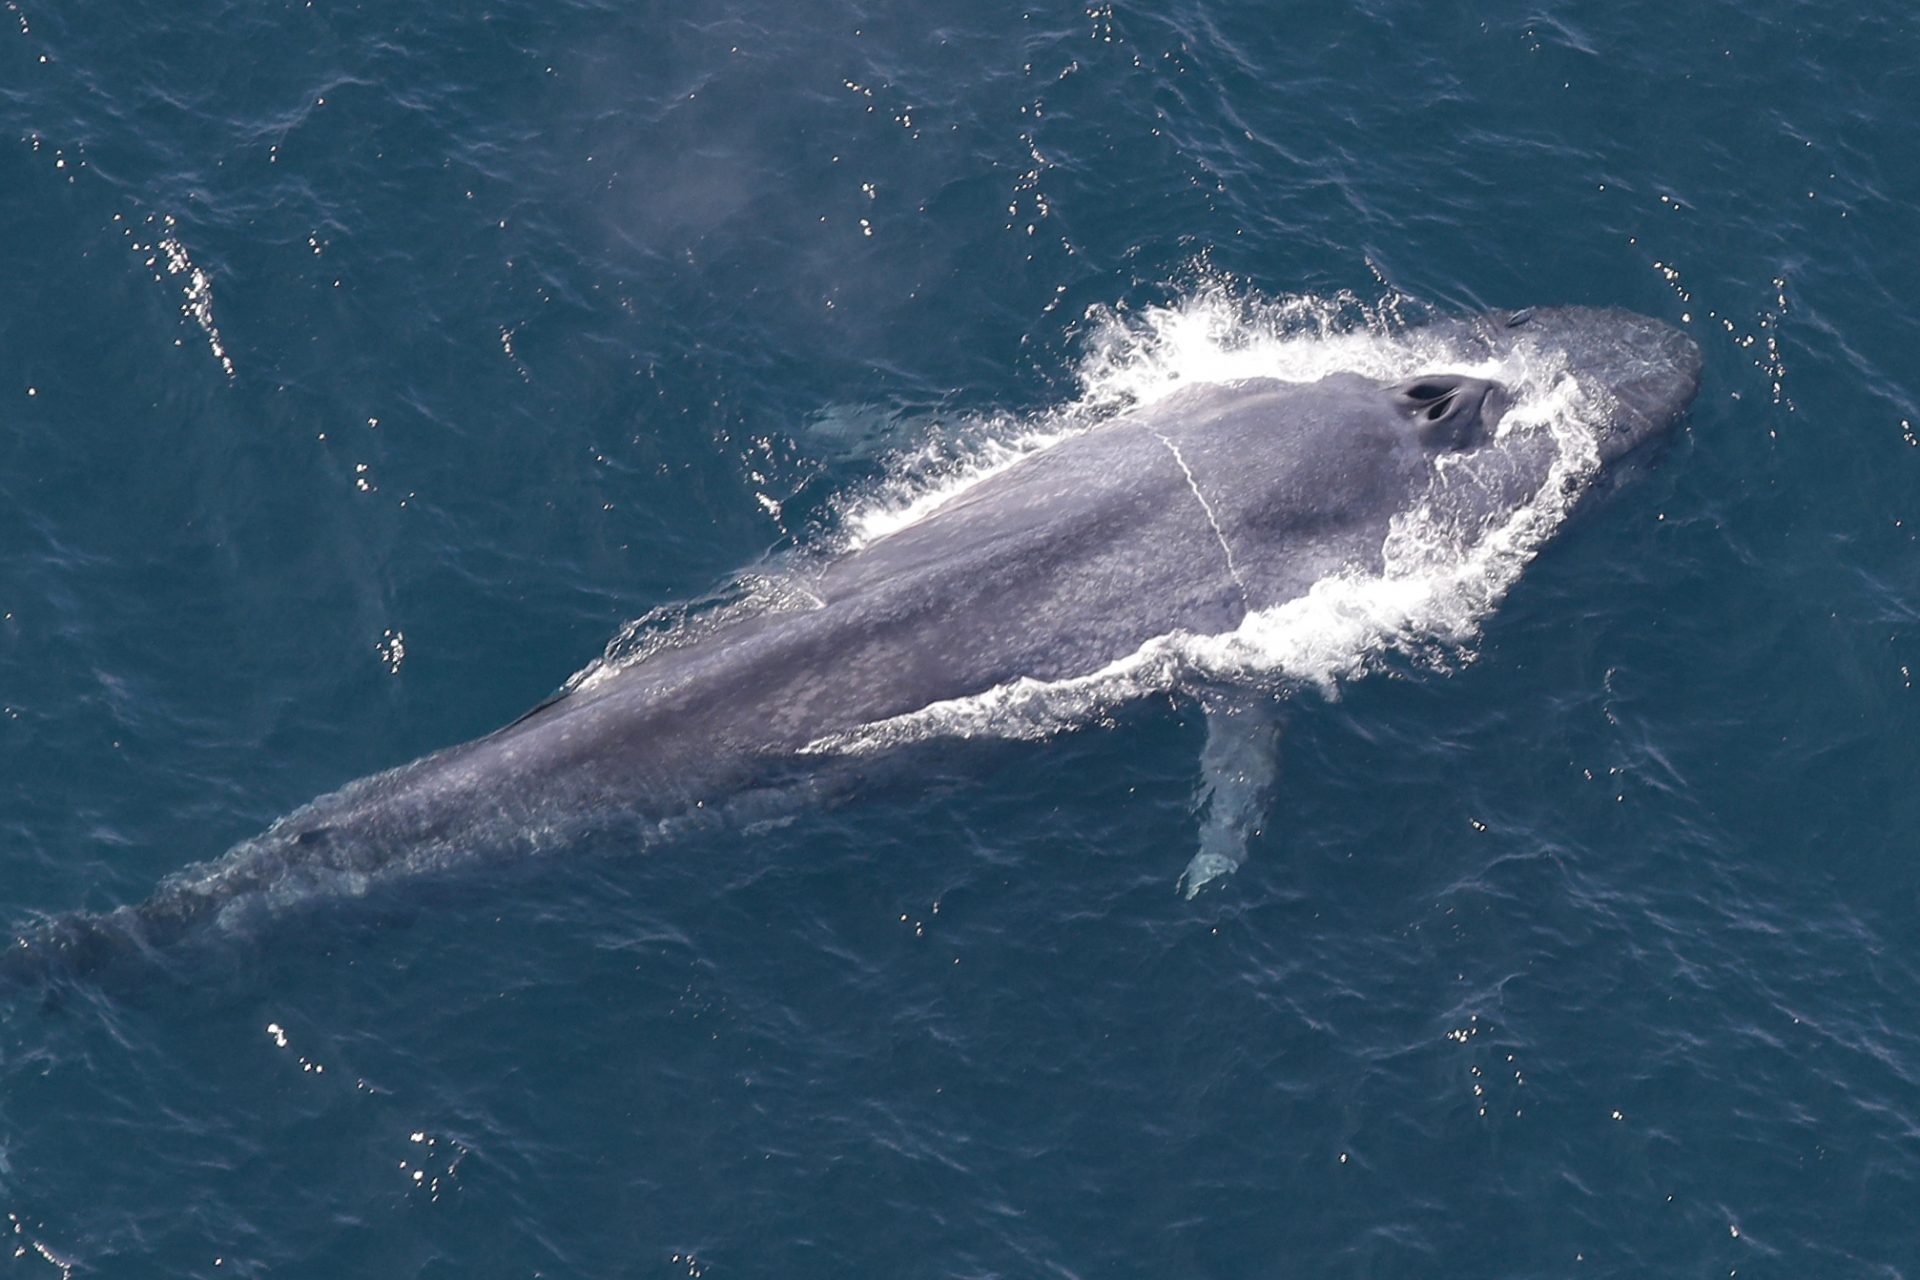 The blue whale: a fascinating animal in photos and facts